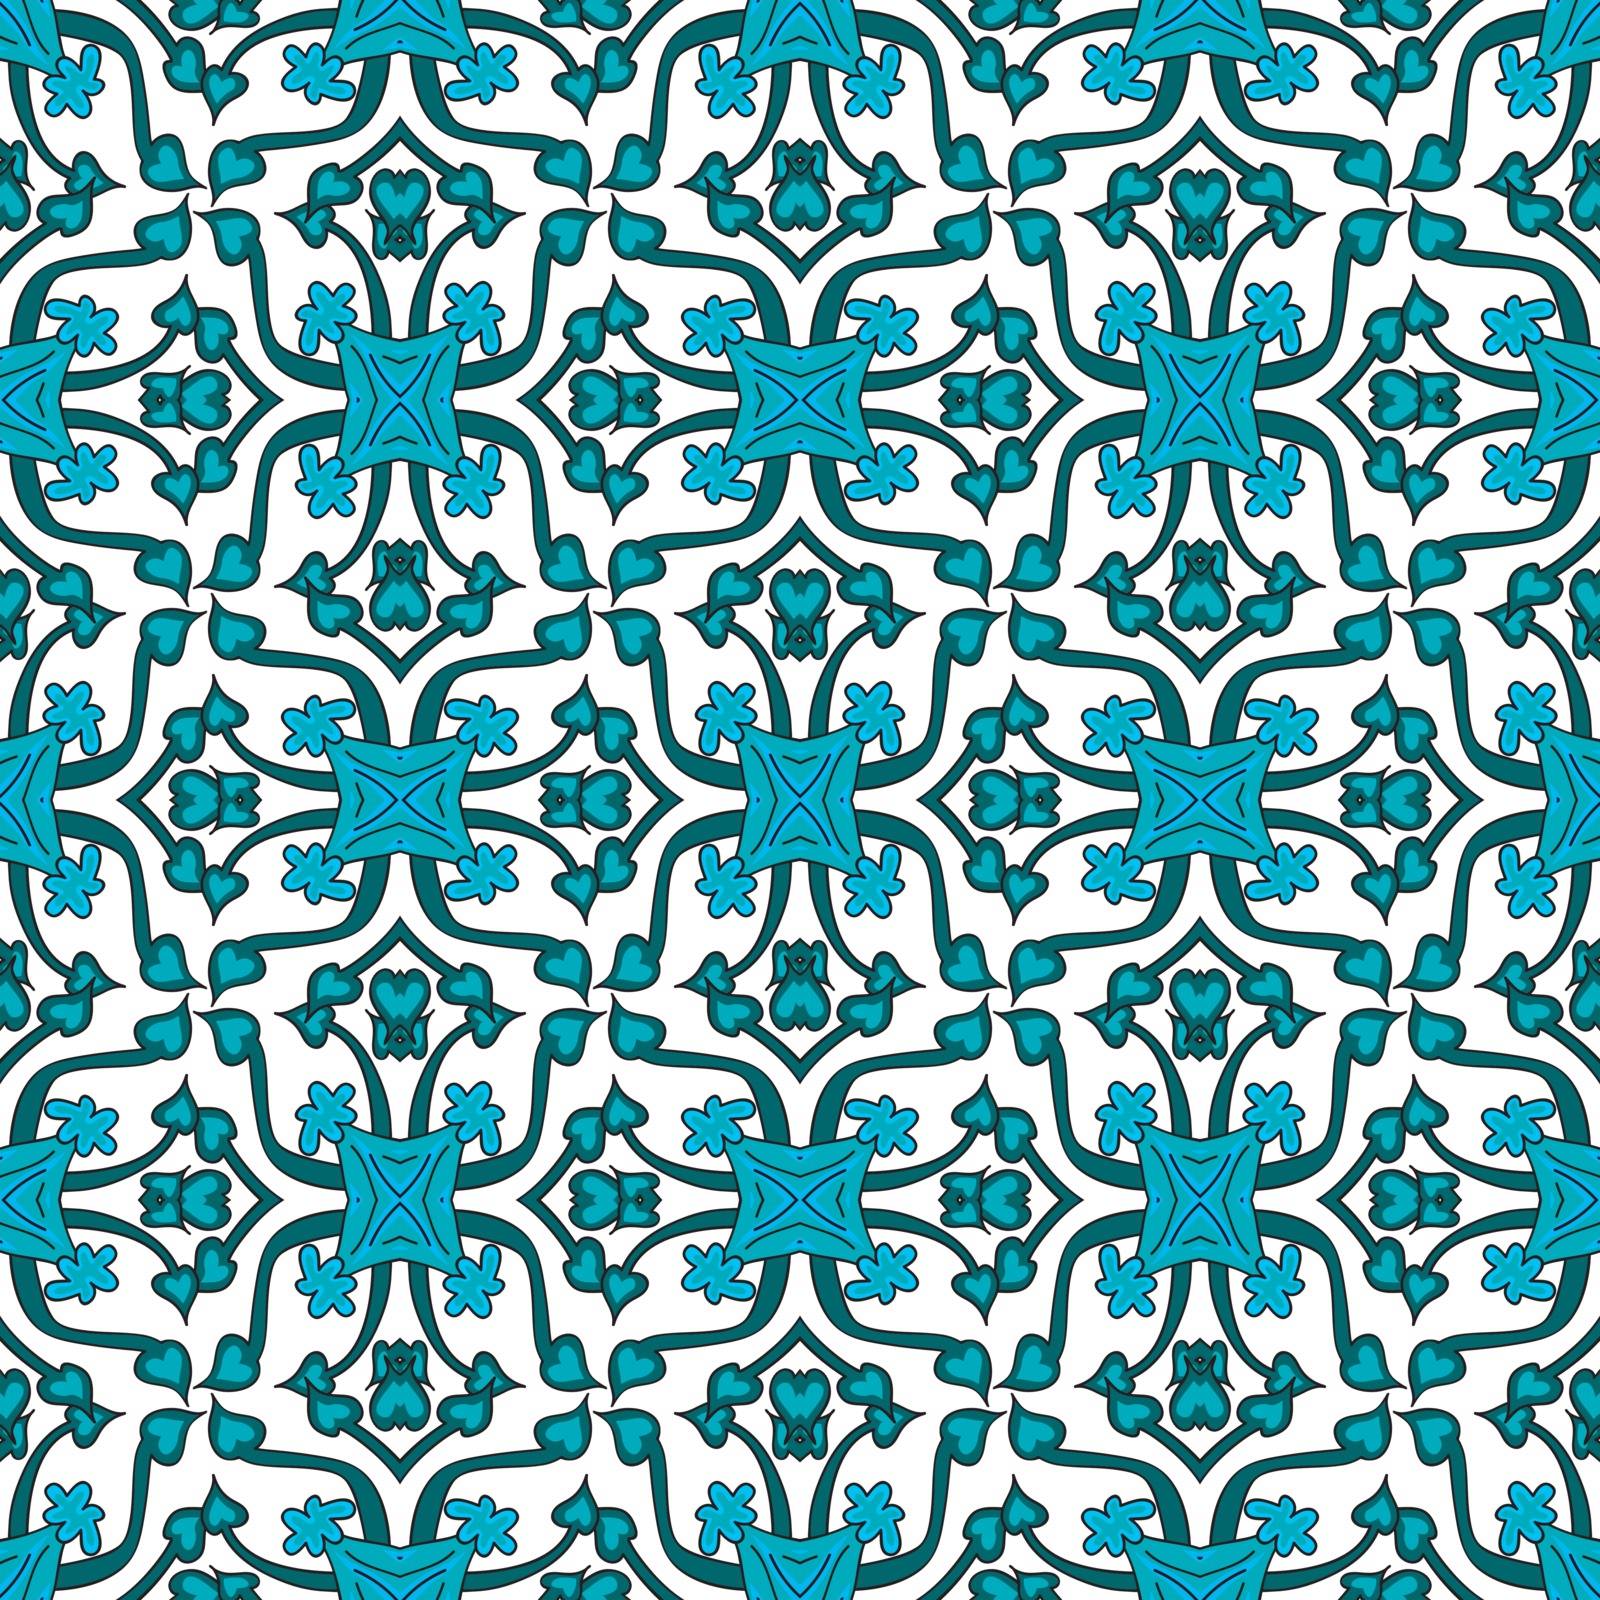 Seamless pattern made of turquoise elements on white